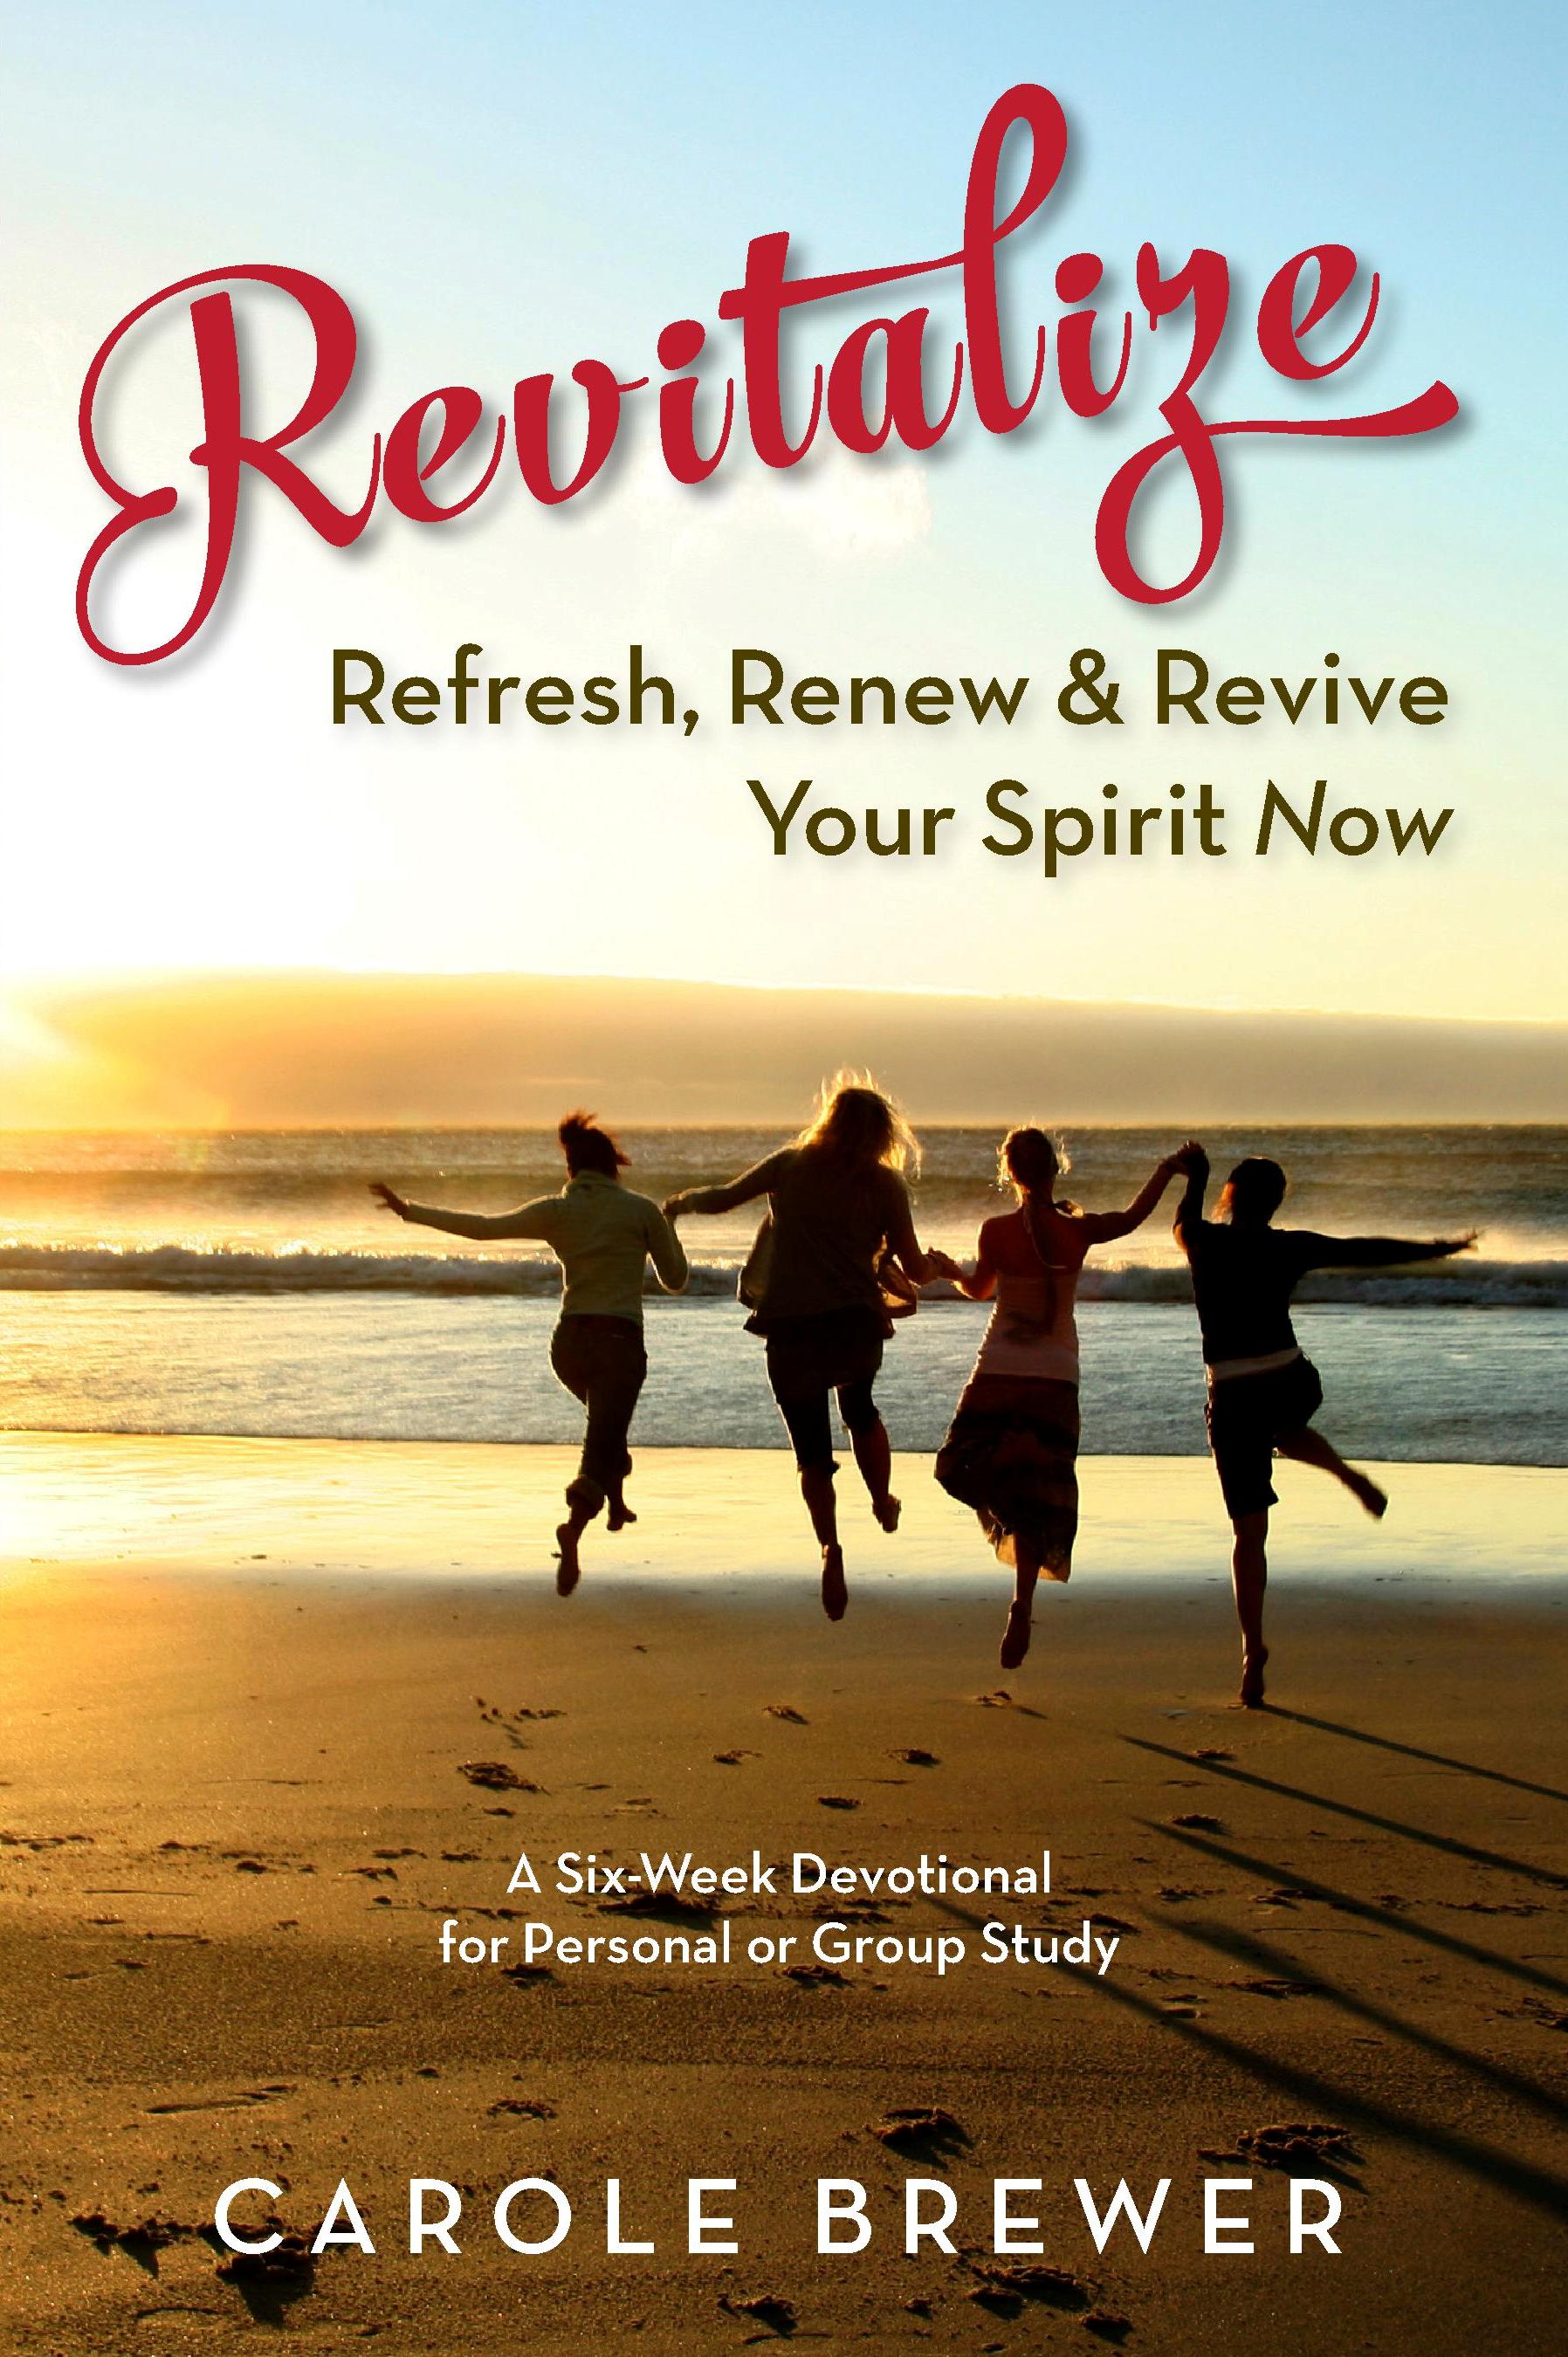 Six-Week Devotional for Personal or Group Study